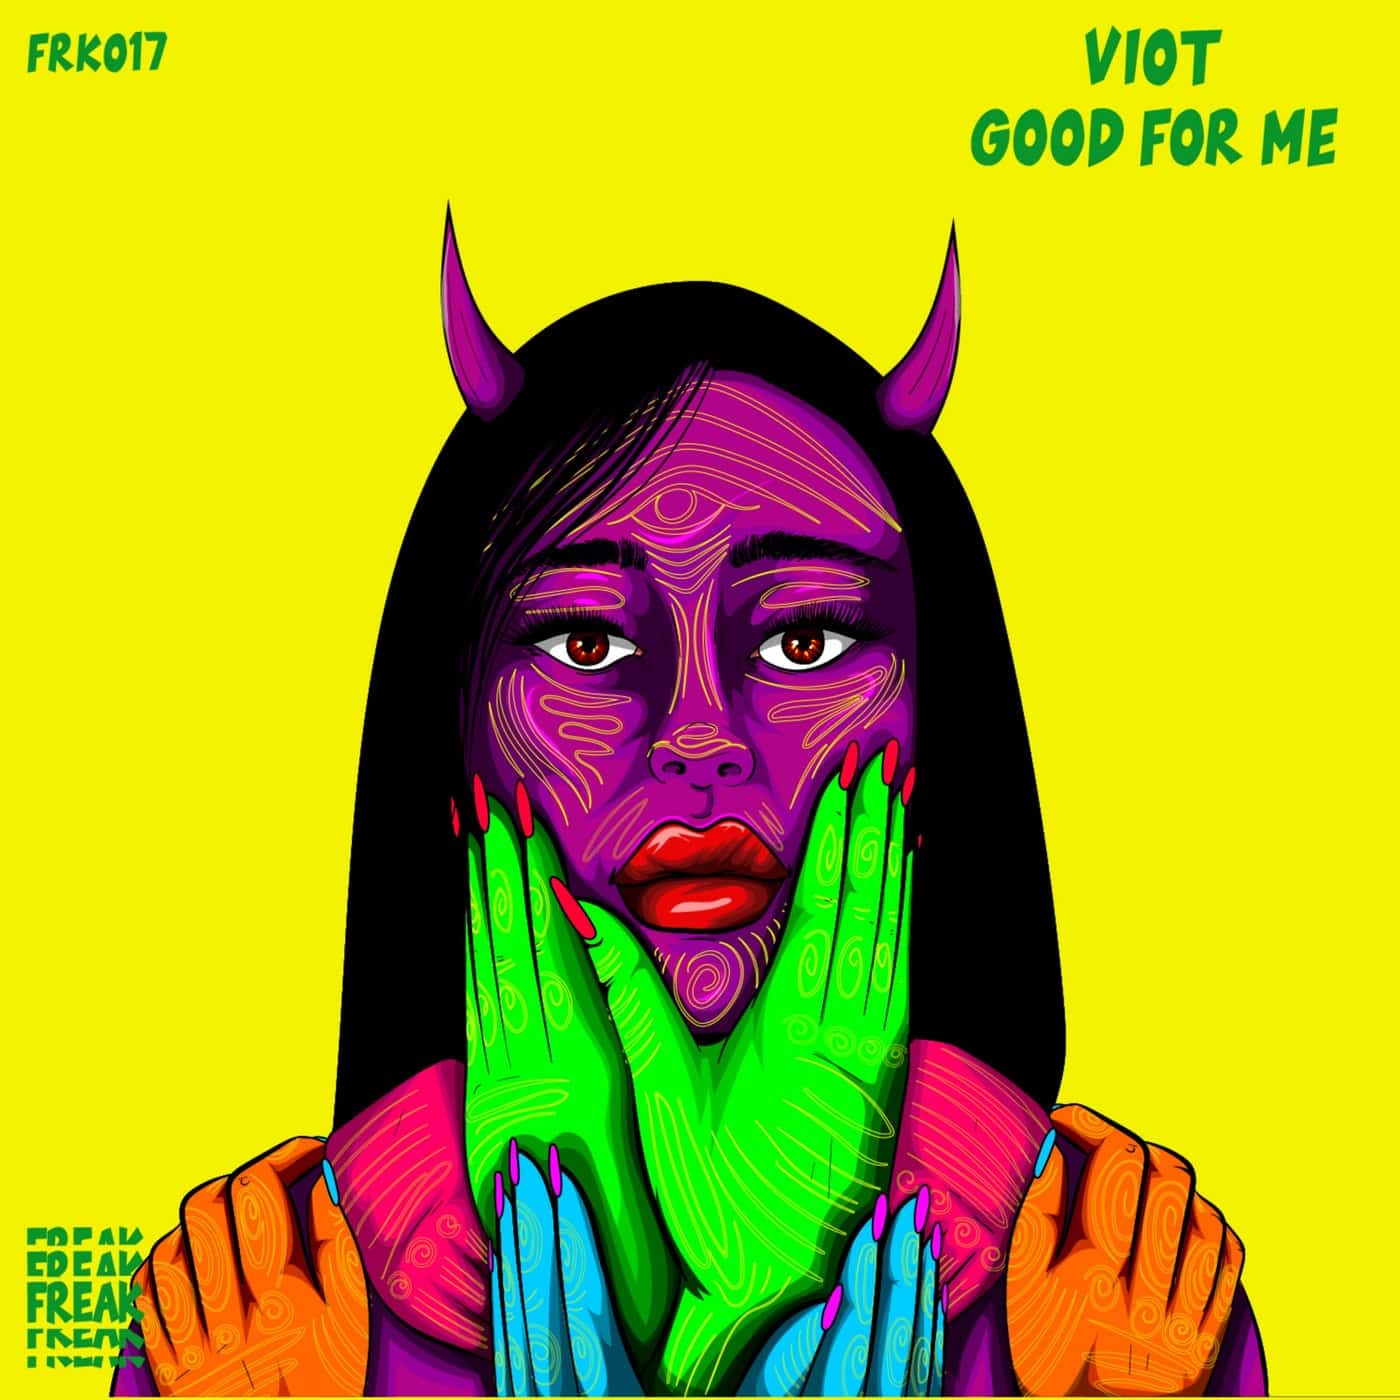 image cover: Viot - GOOD FOR ME / FRK017